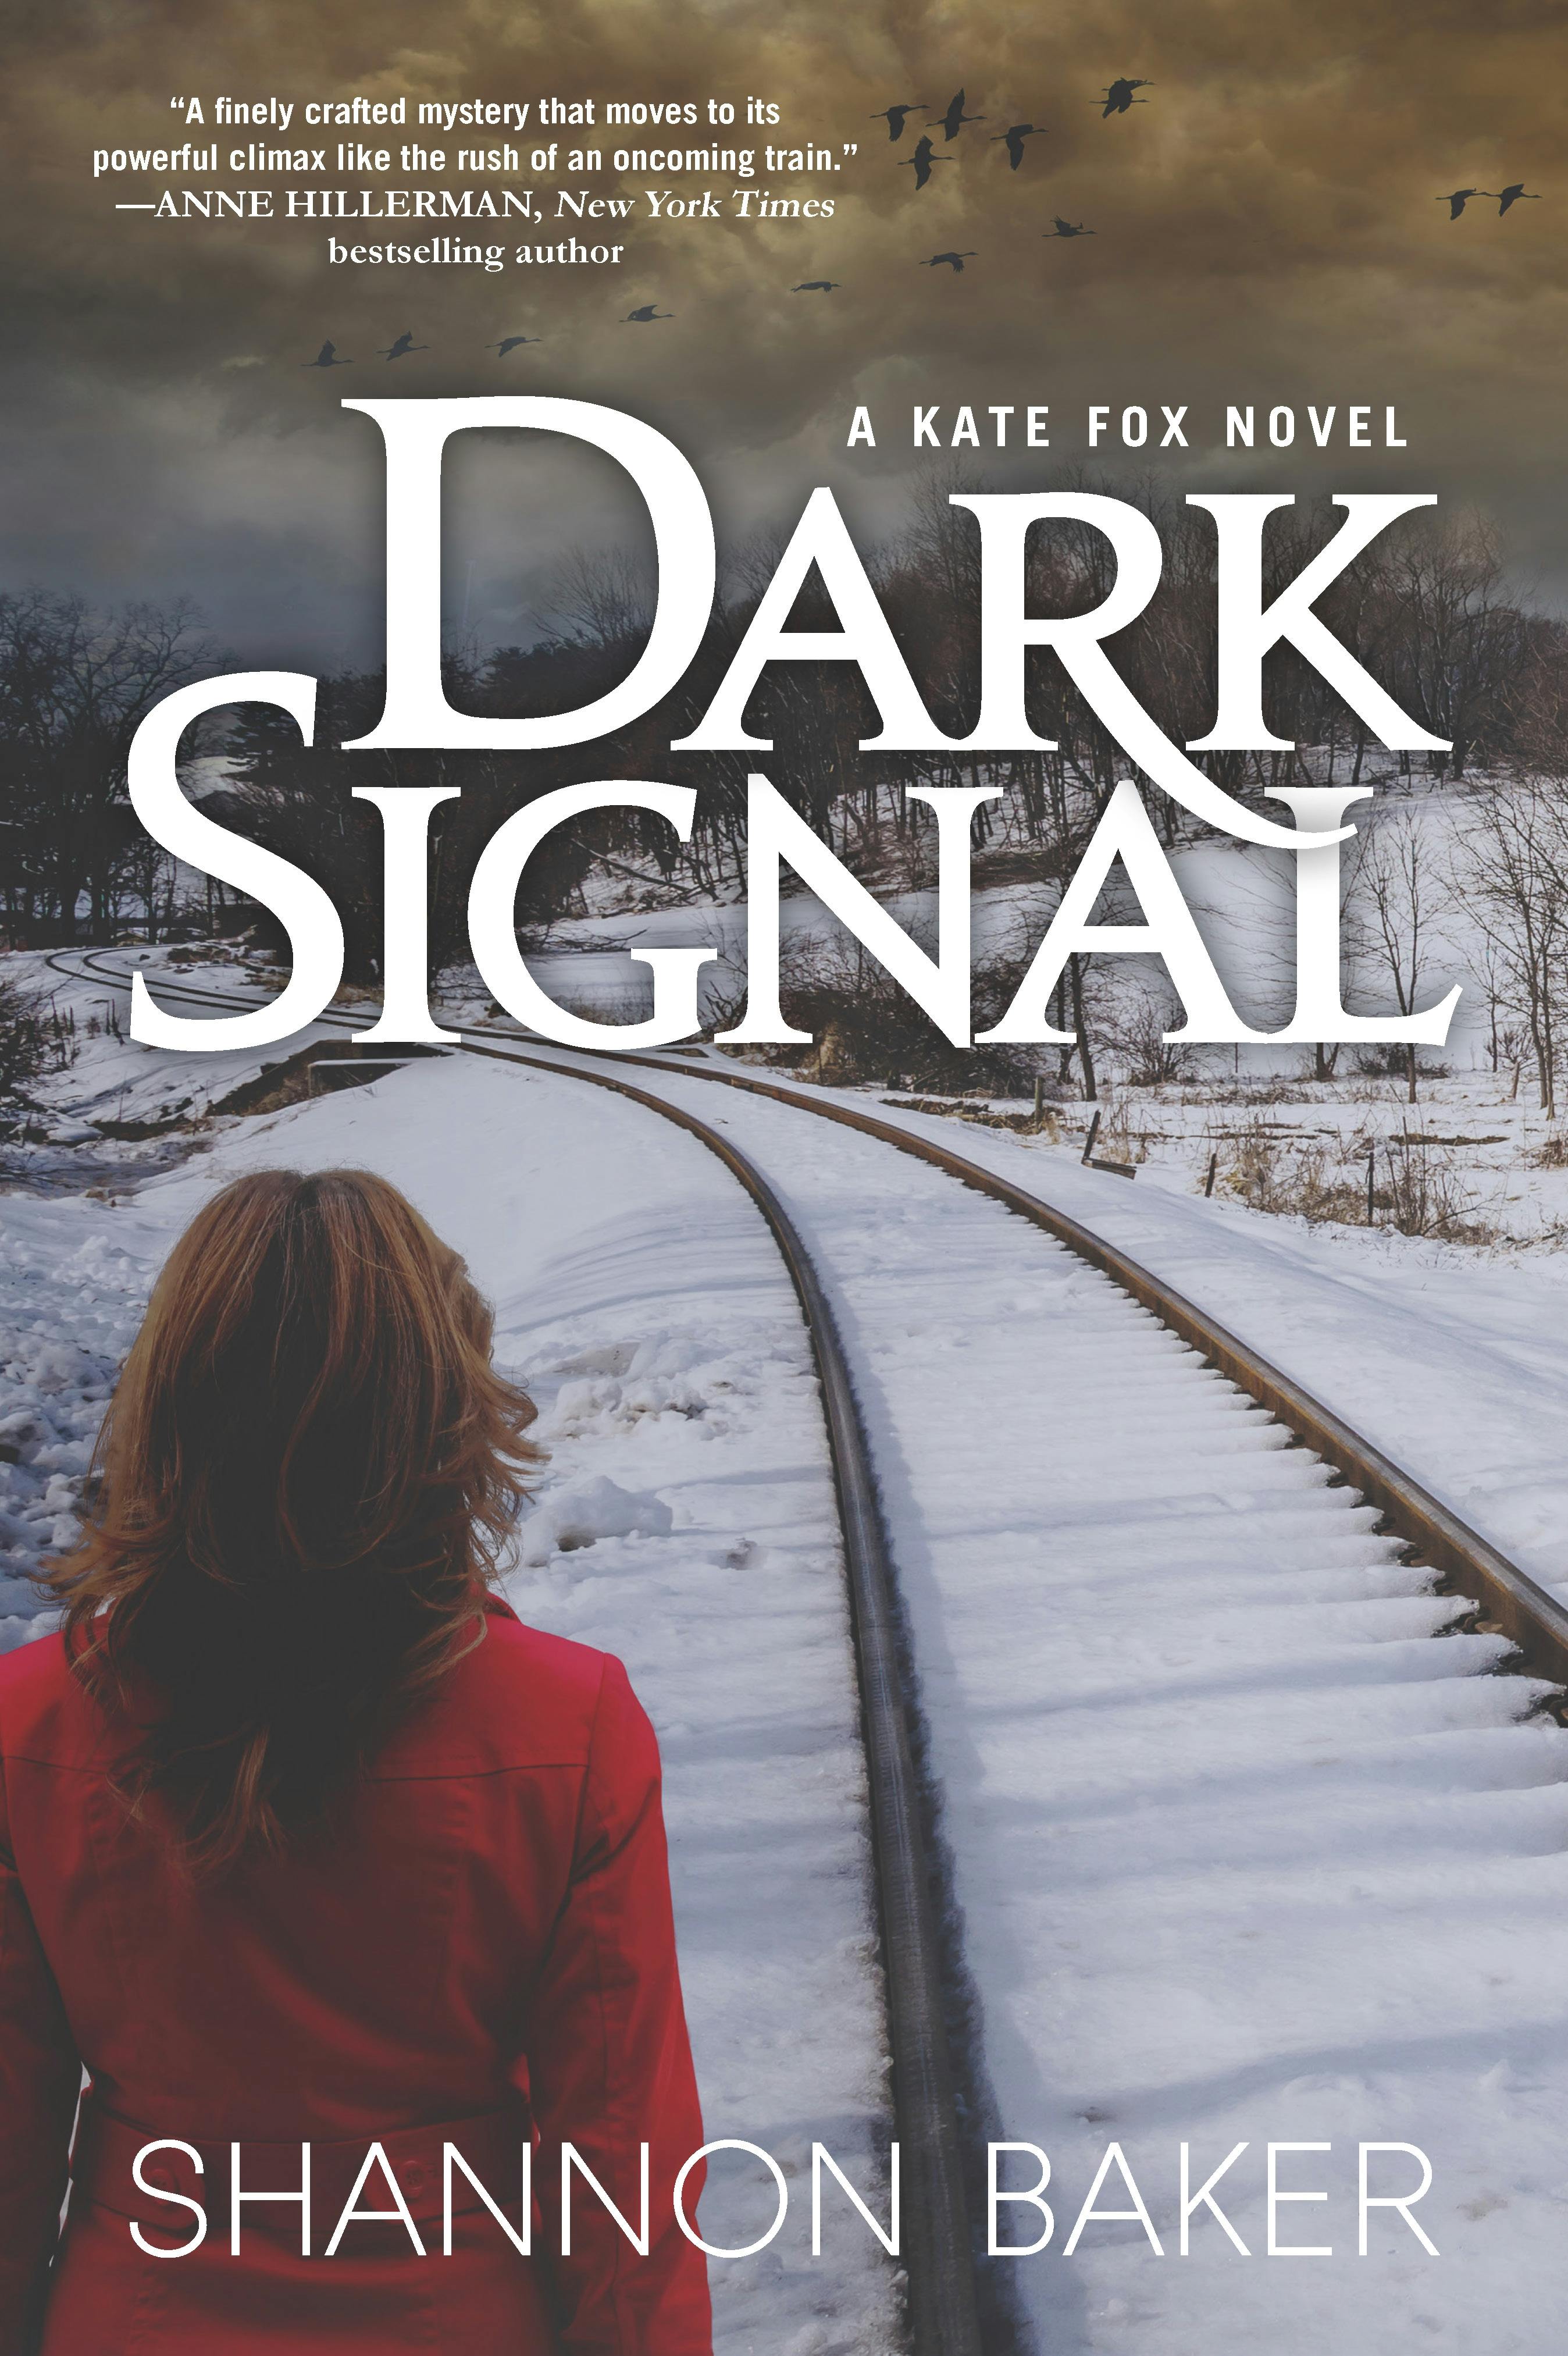 Cover for the book titled as: Dark Signal